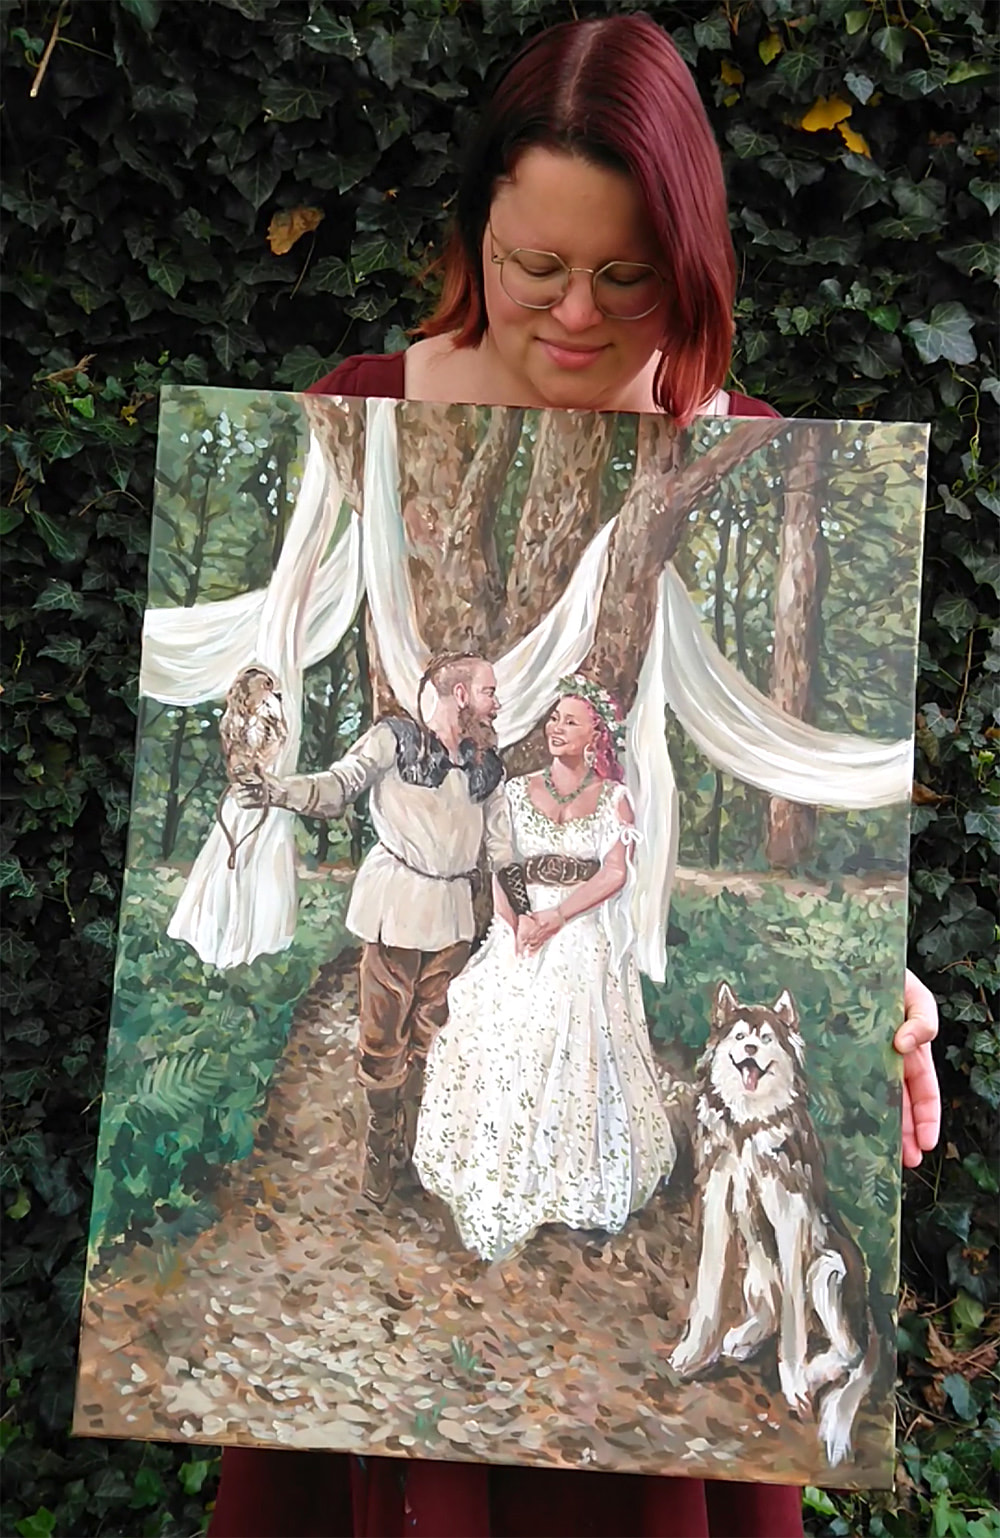 Photo of a viking themed wedding painting